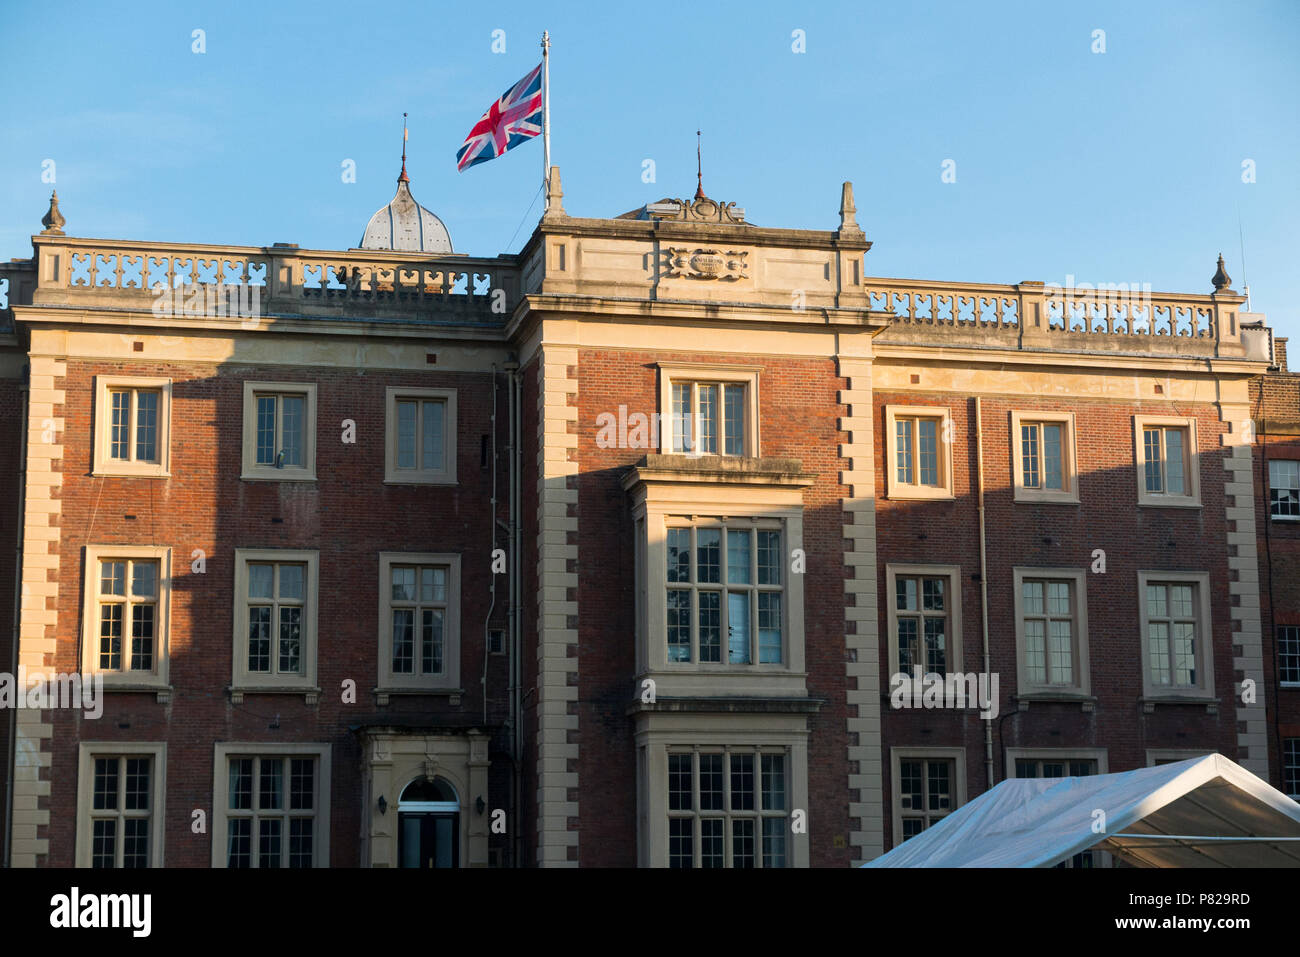 The rear / back of Kneller Hall complete with Union flag flying,& flag pole, Twickenham. It houses the Royal Military School of Music. Twickenham. (99) Stock Photo